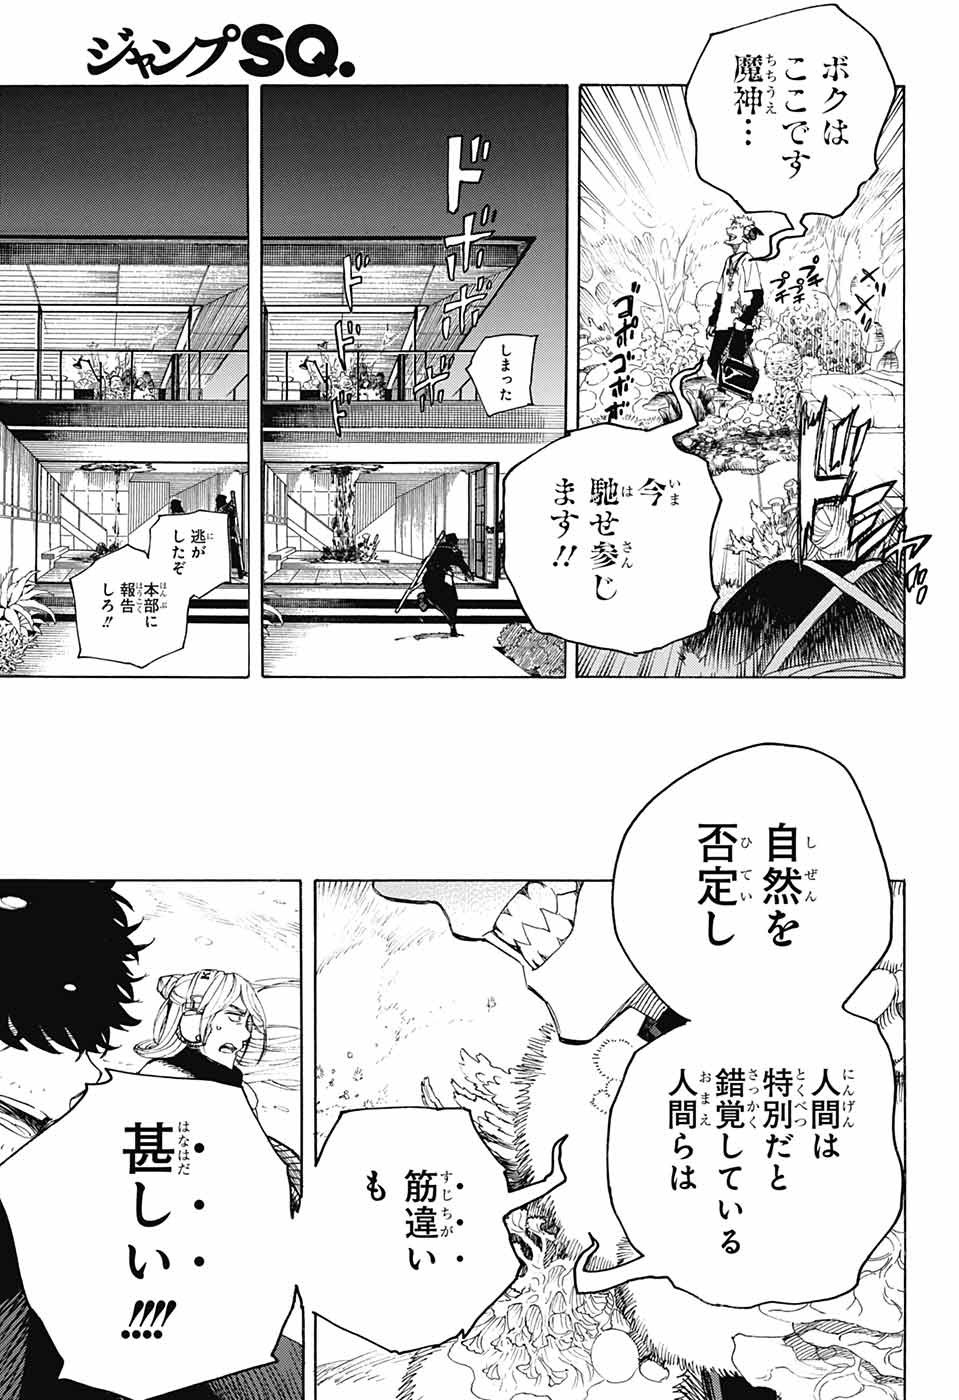 Ao no Exorcist - Chapter 134 - Page 34